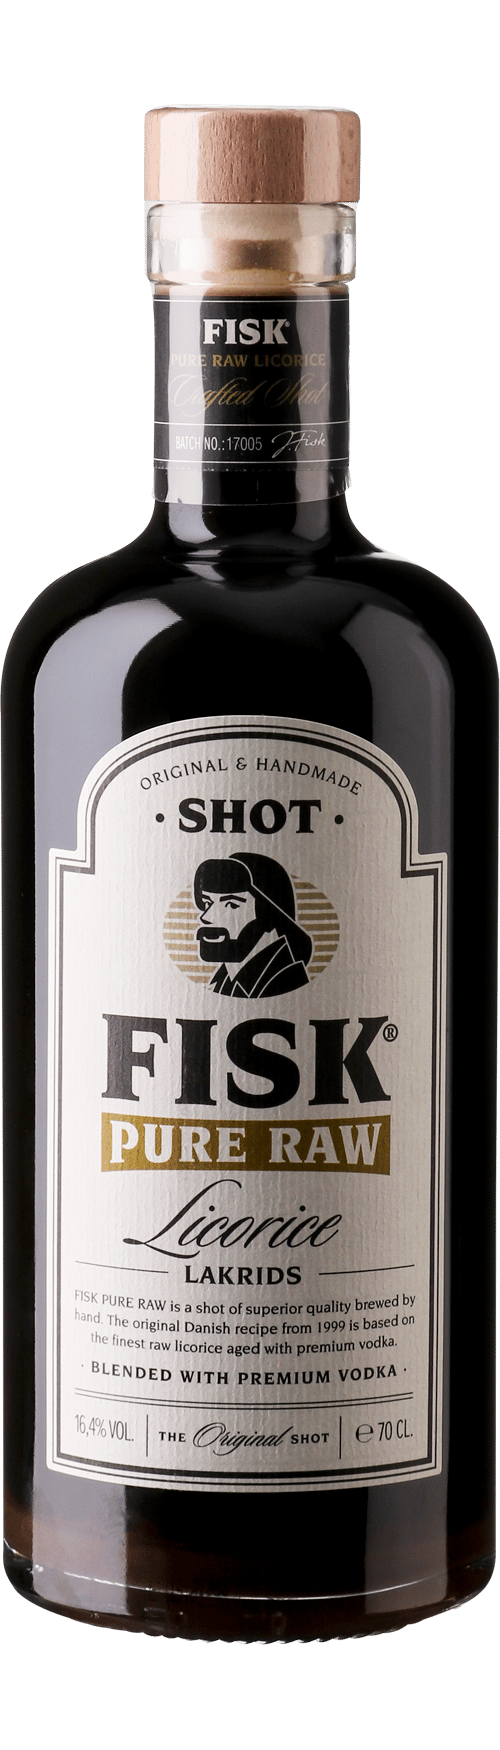 Fisk Pure Raw 70 cl. 16,4%